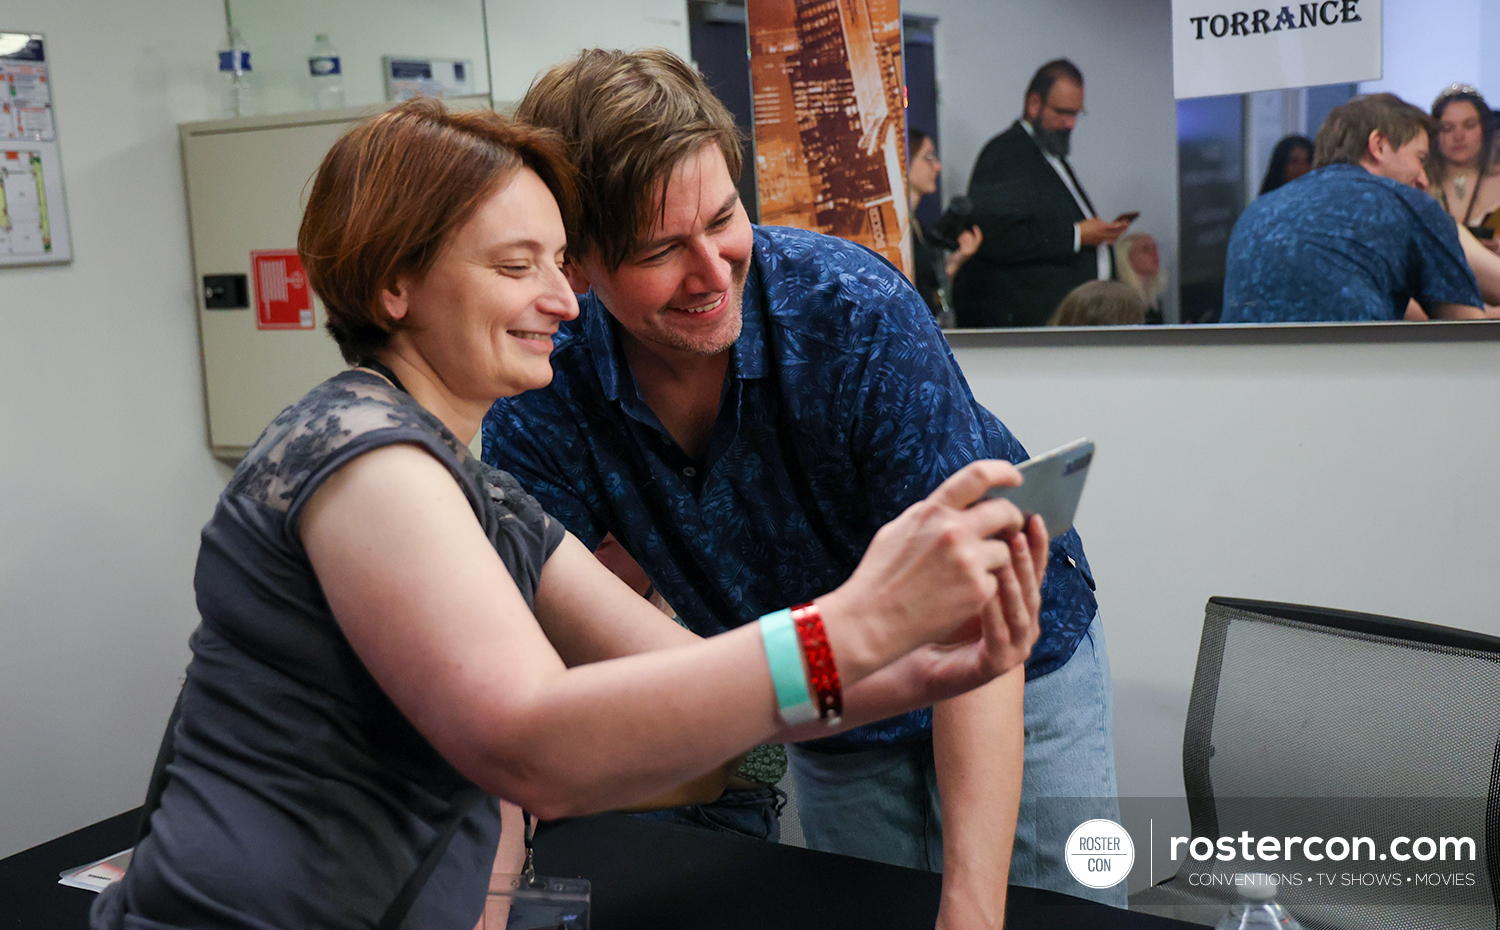 Autographs - Torrance Coombs - Long May She Reign 2 - Reign